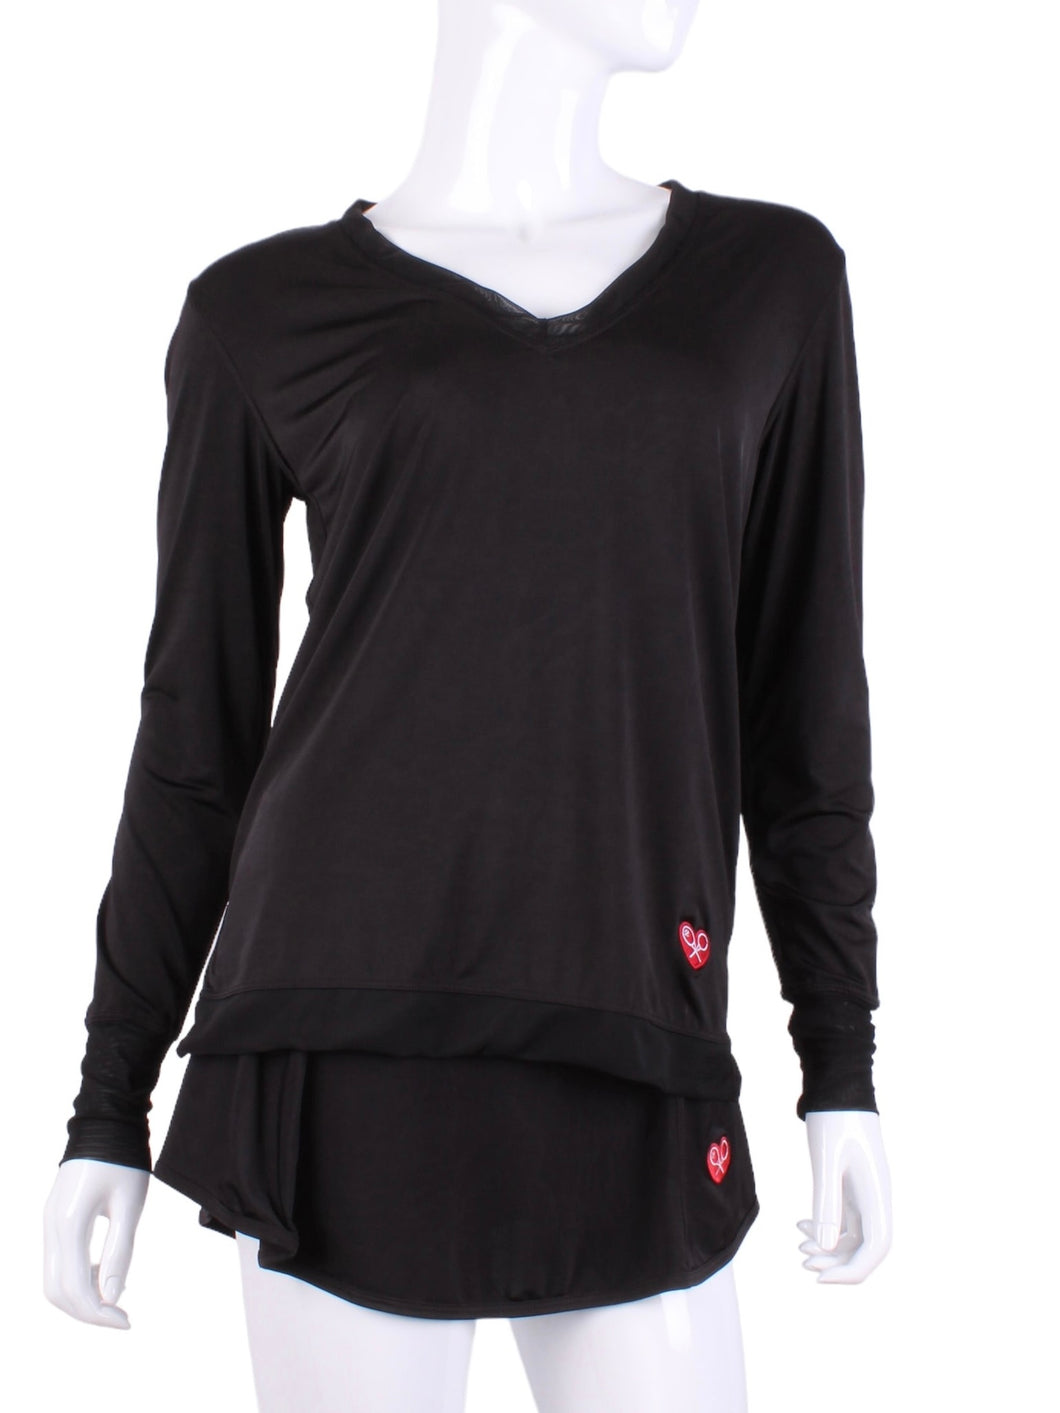 This top is soooo gorgeous!    It’s called the Long Sleeve Very Vee Tee - because as you can see - the Vee is - well you know - VERY VEE!  This top is seductive in a sweet way!  You feel nearly naked in it.  So go ahead - hit that ace!  Flattering and free - that’s what this top is.